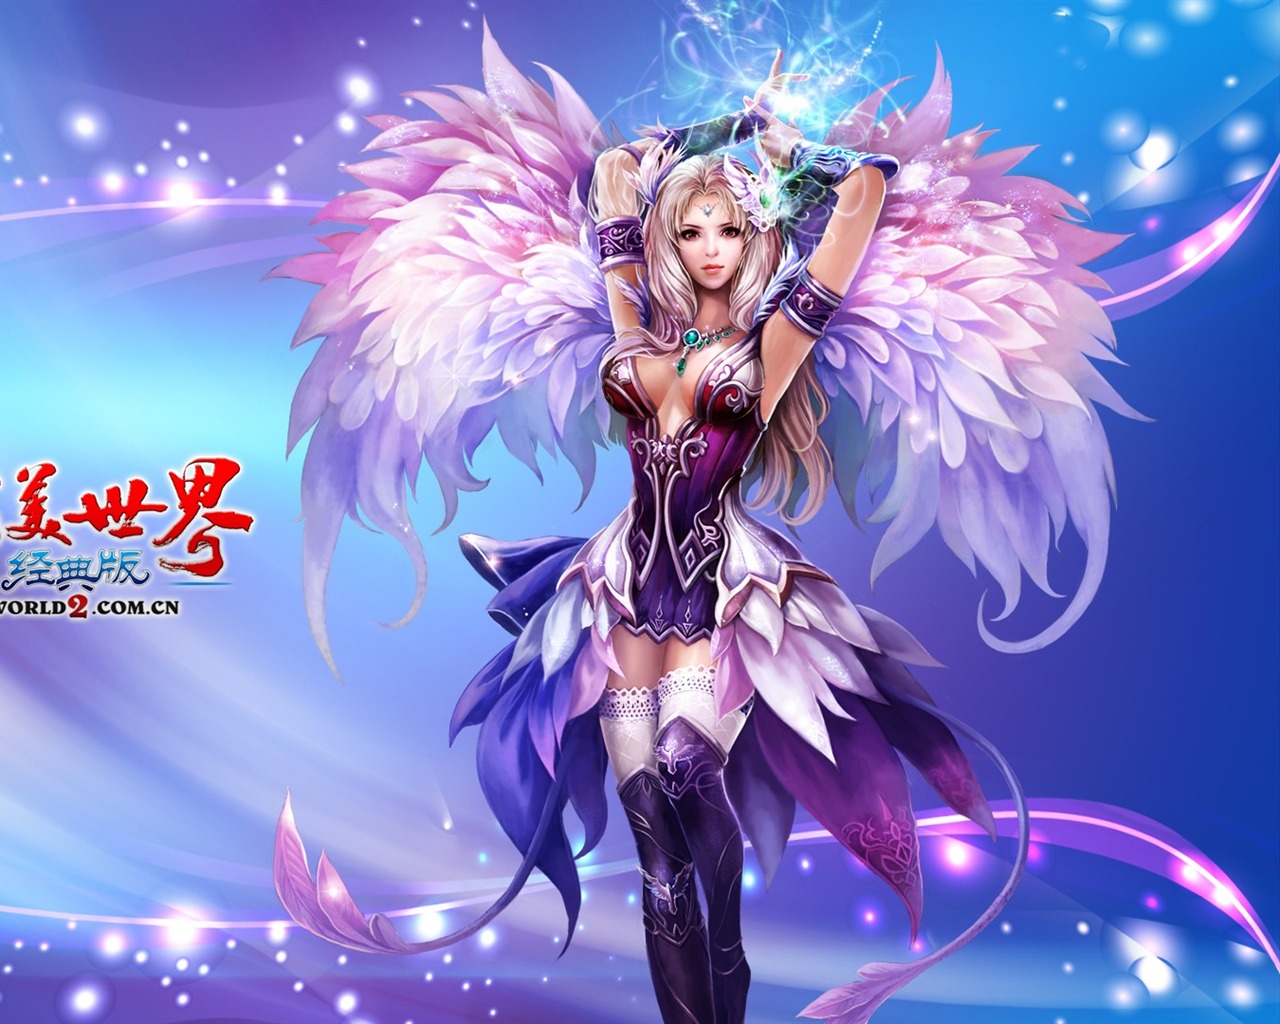 Online game Perfect World Classic HD wallpapers #20 - 1280x1024